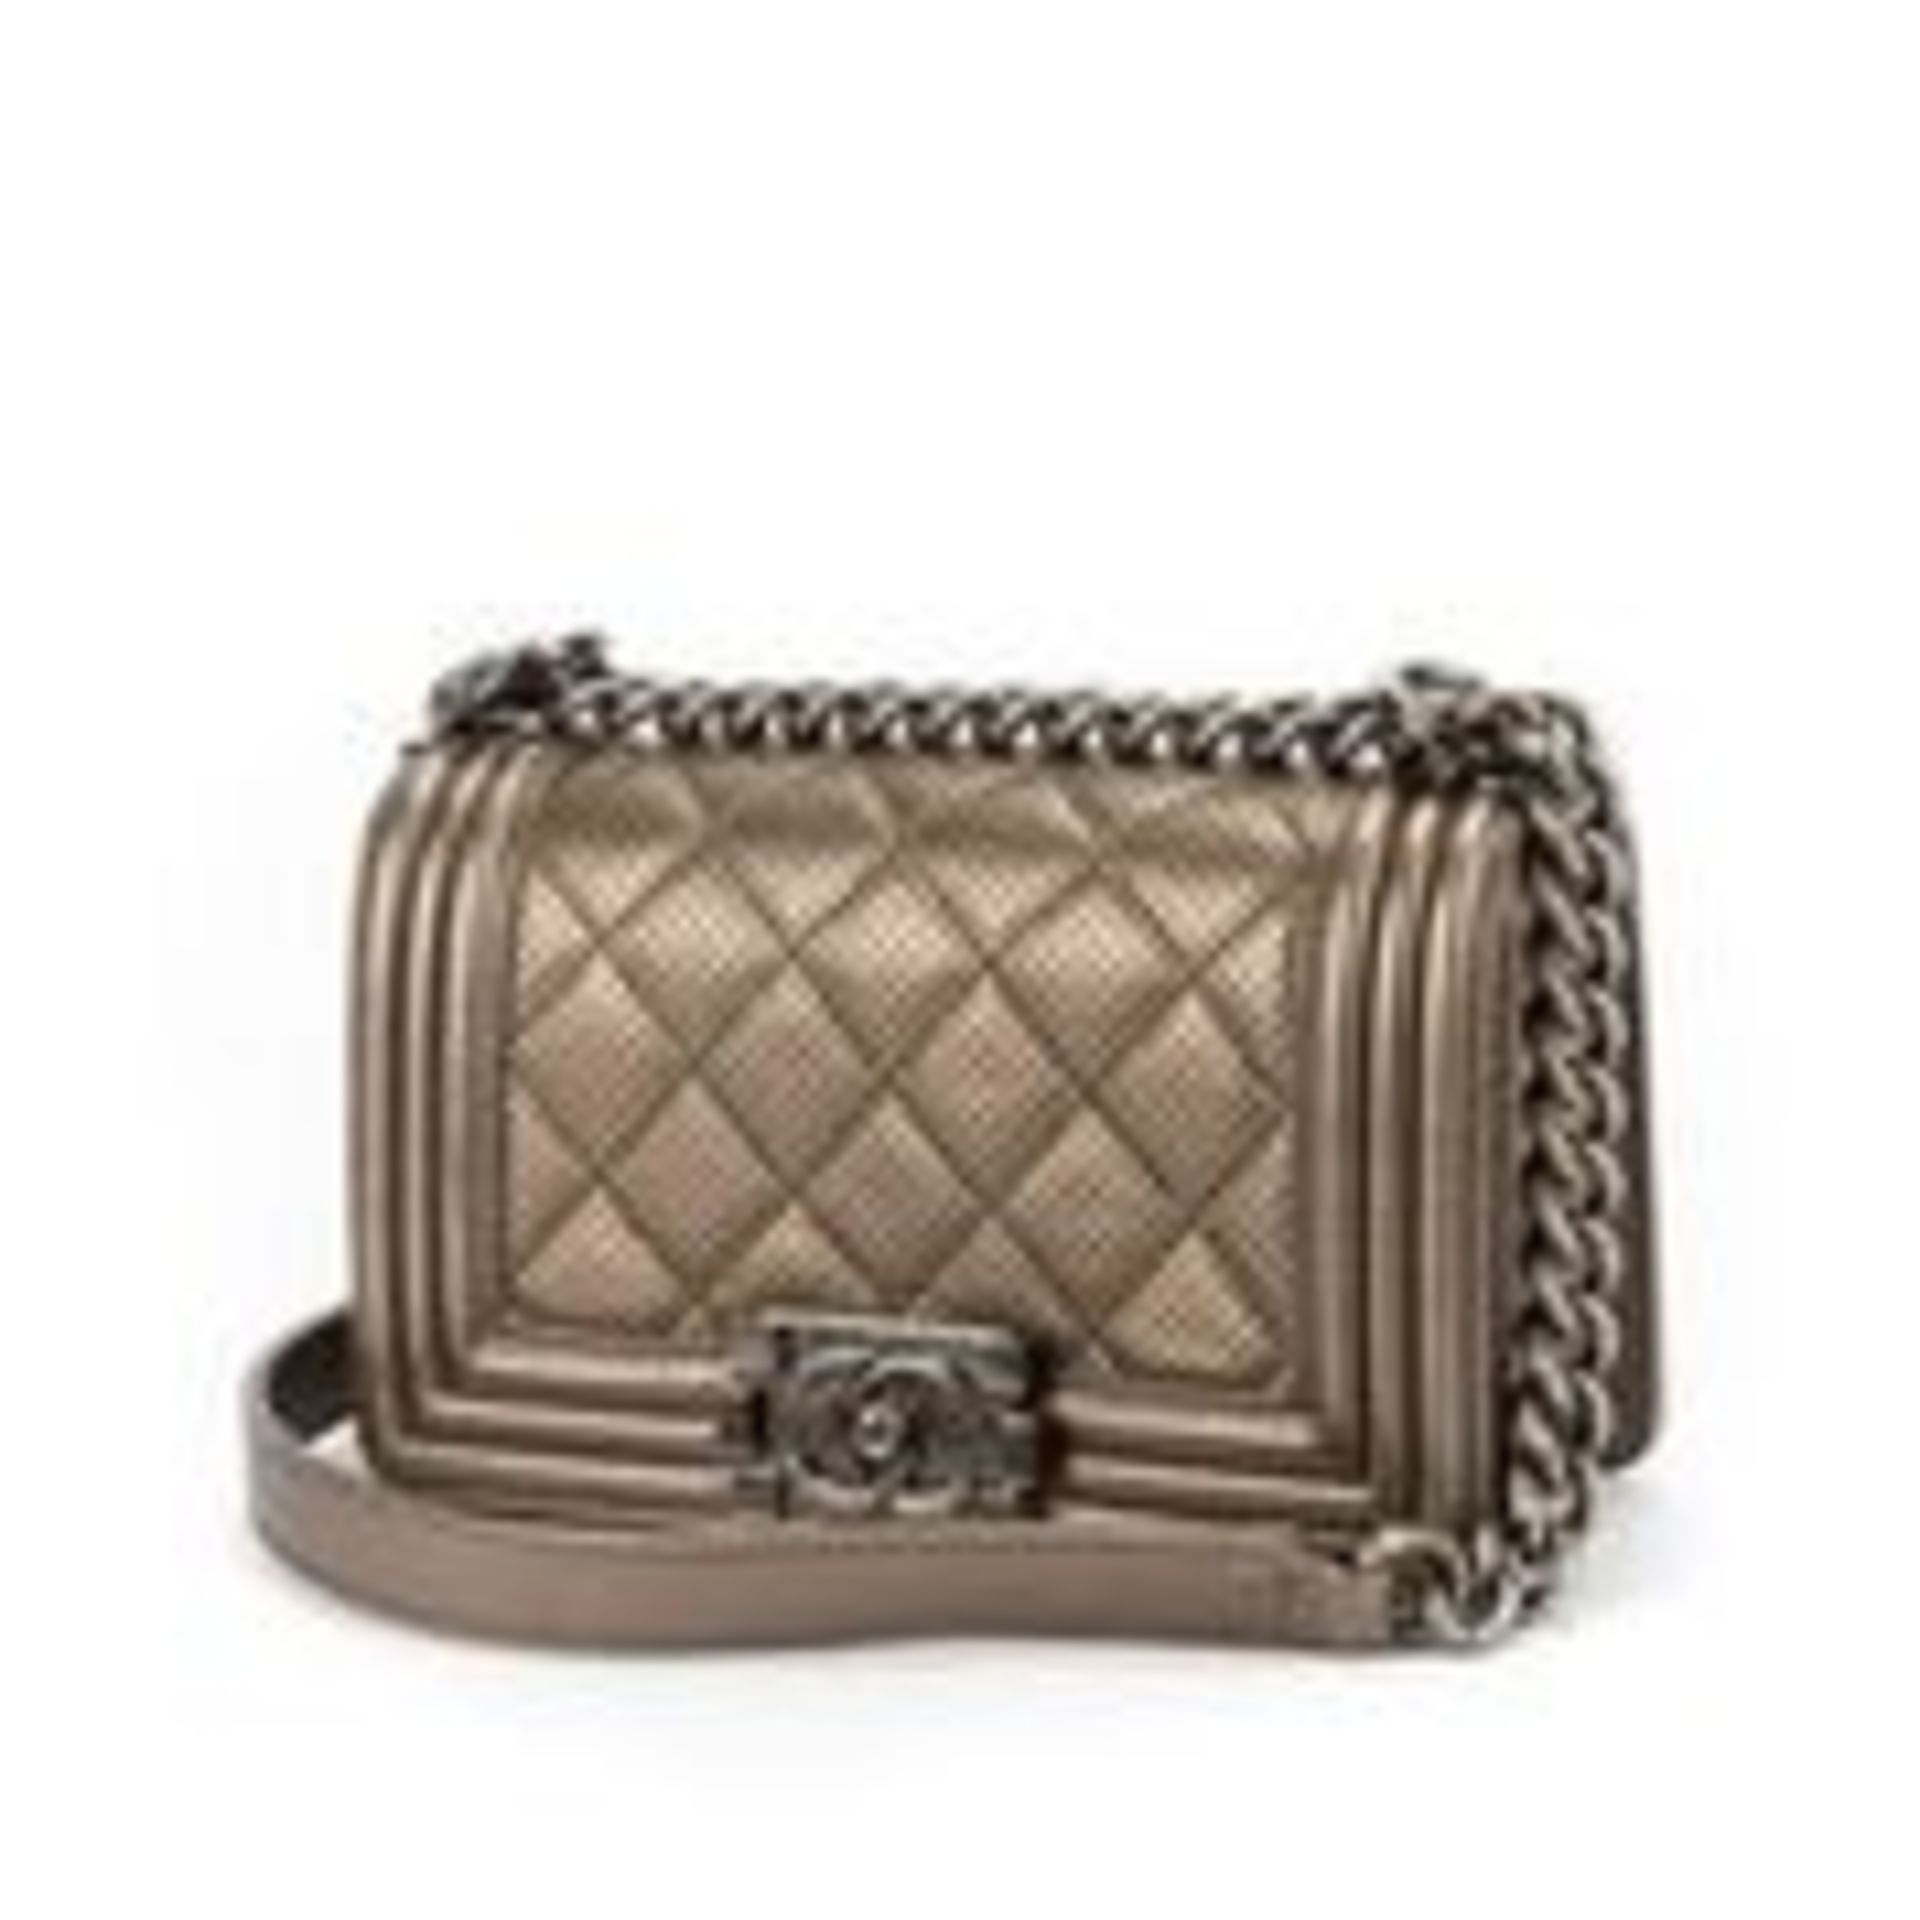 RRP £4,800 Chanel Boy Shoulder Bag Olive Green - EAG3118 - Grade AA - Please Contact Us Directly For